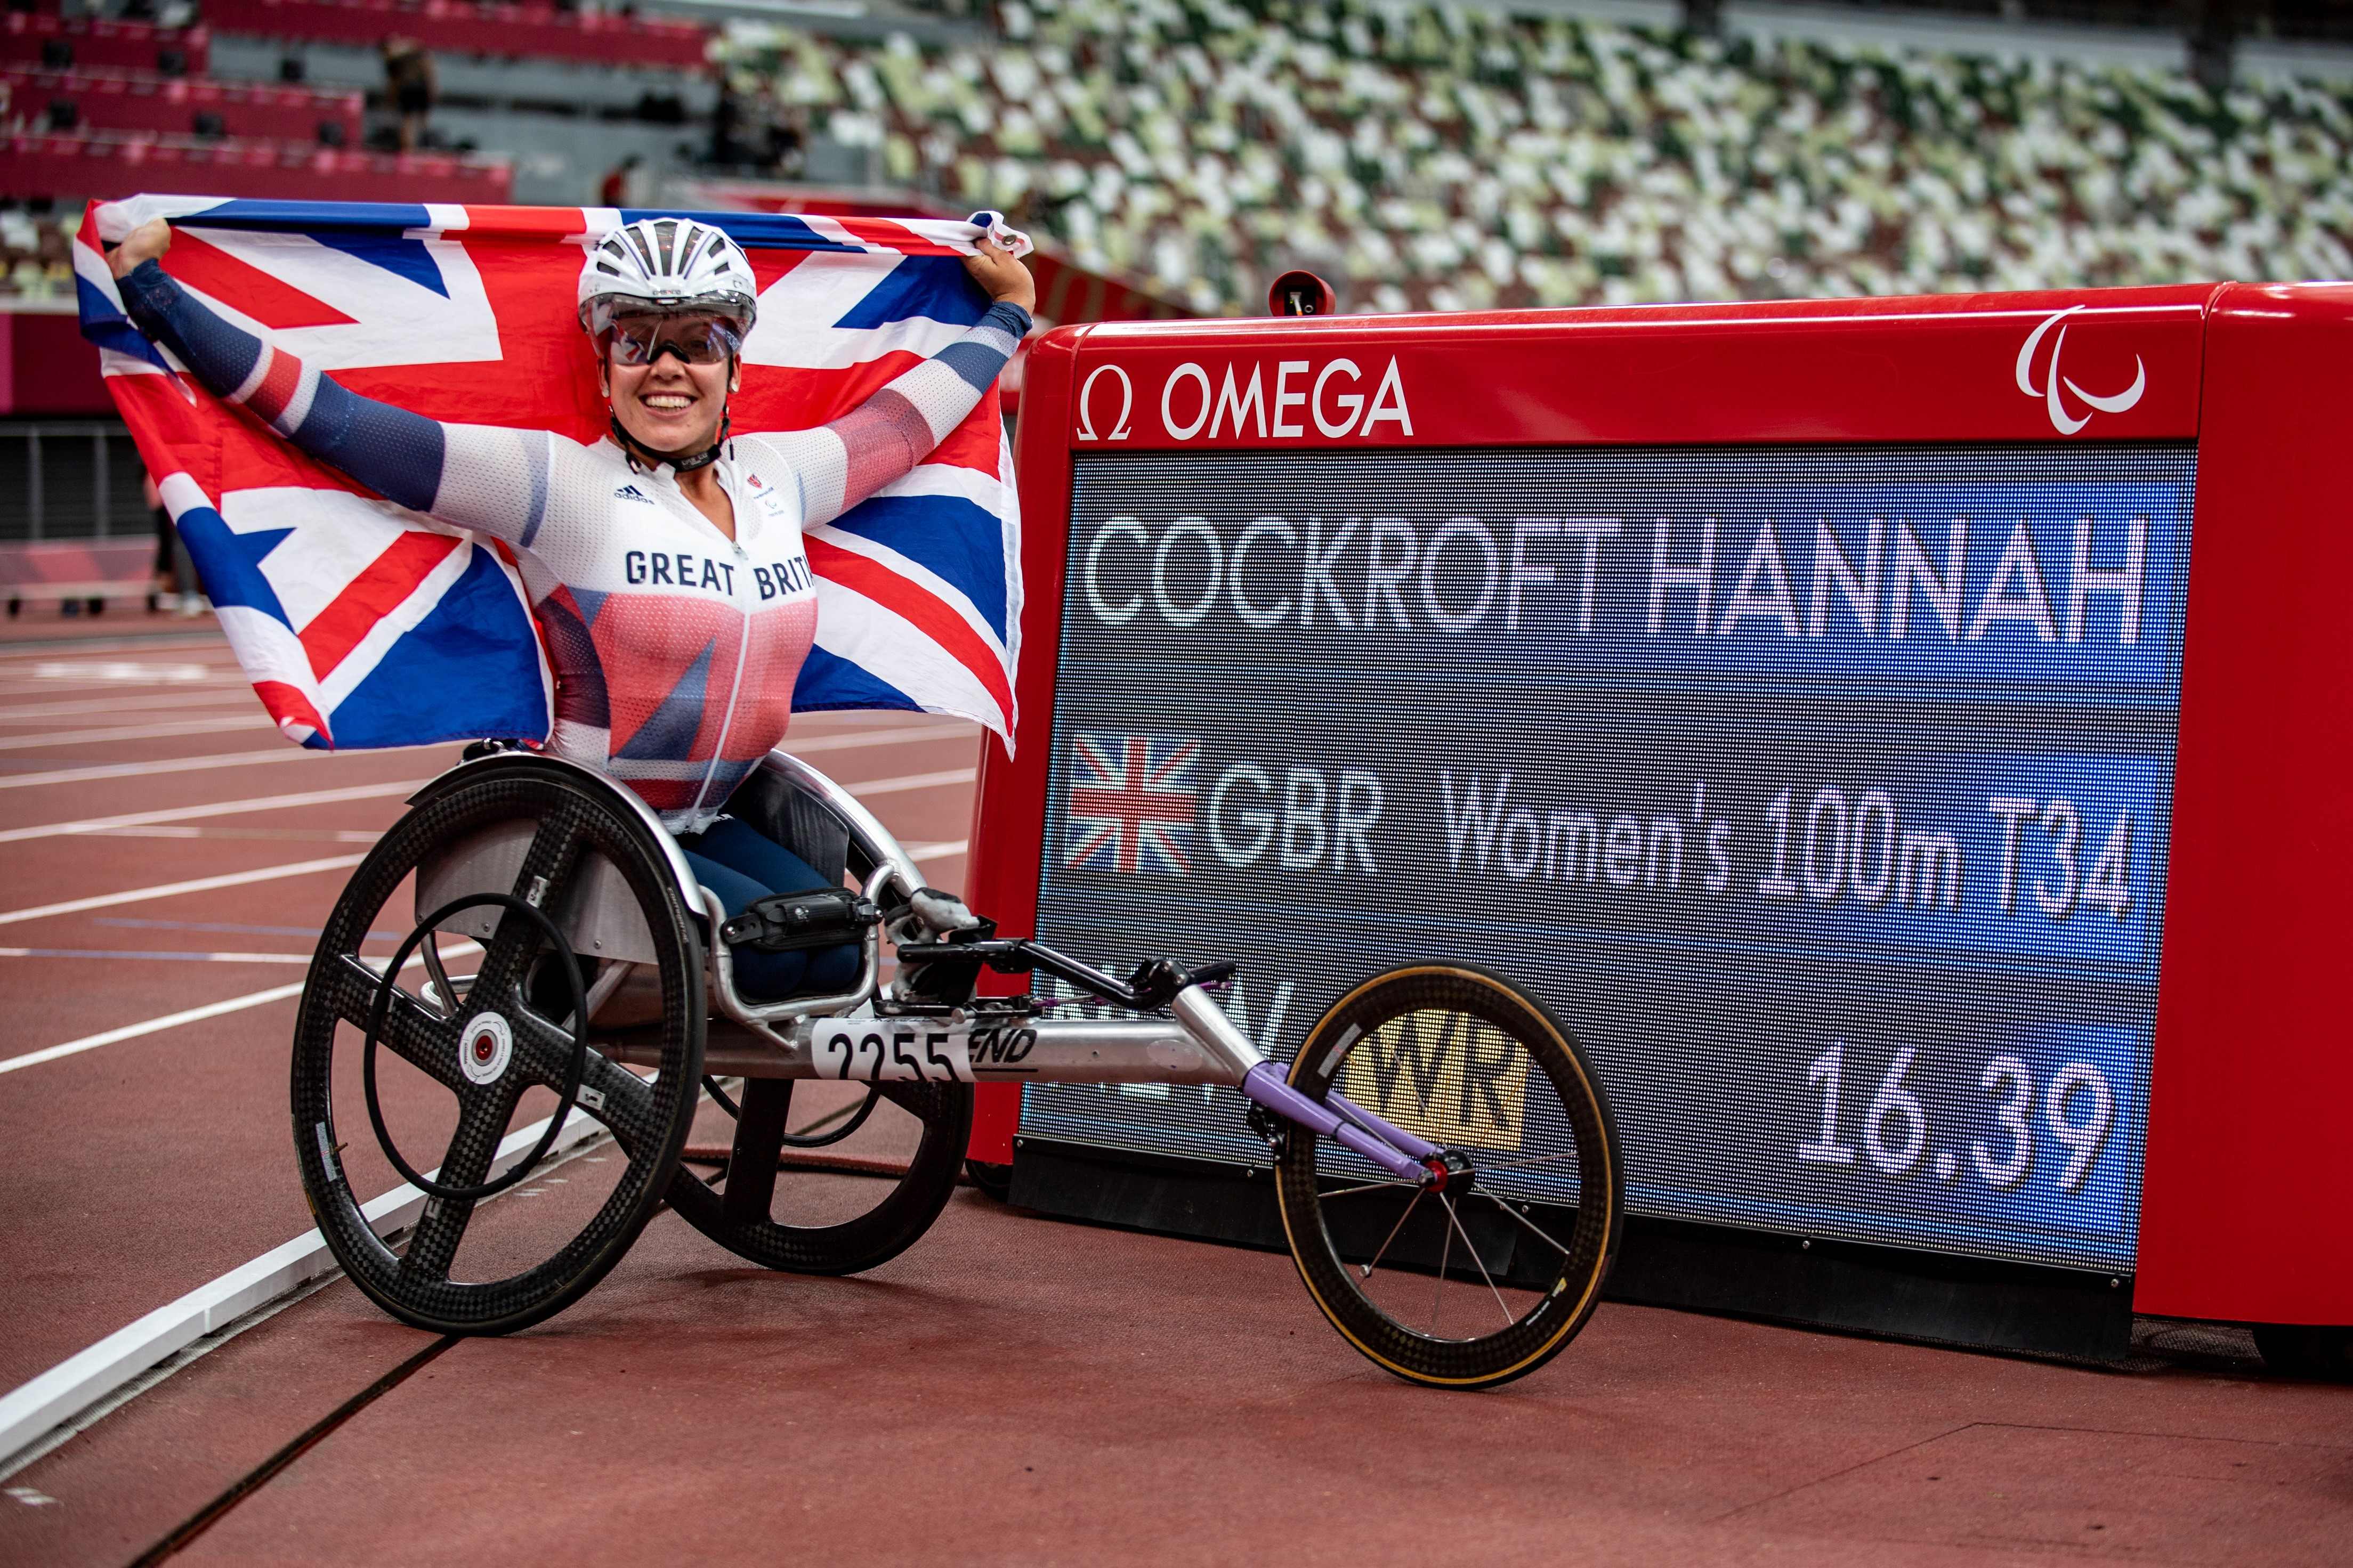 Hannah Cockroft celebrates winning gold in a world record time